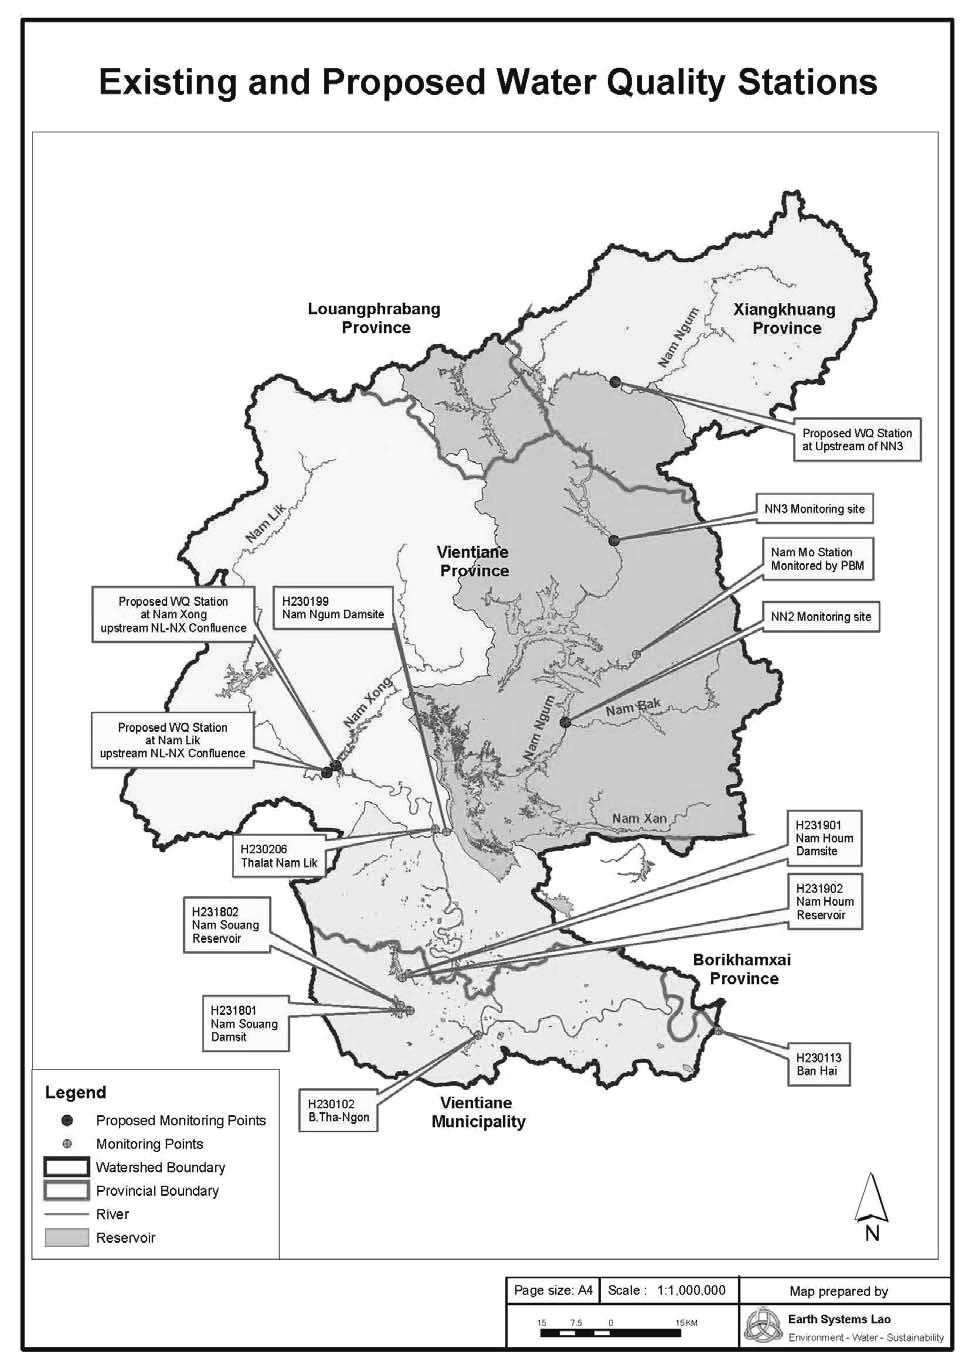 Source: NN3 Cumulative Impact Assessment, Appendix C Figure 1. Existing and Proposed Water Quality Stations, Nam Ngum 3 Cumulative Impact Assessment Study Table 3.